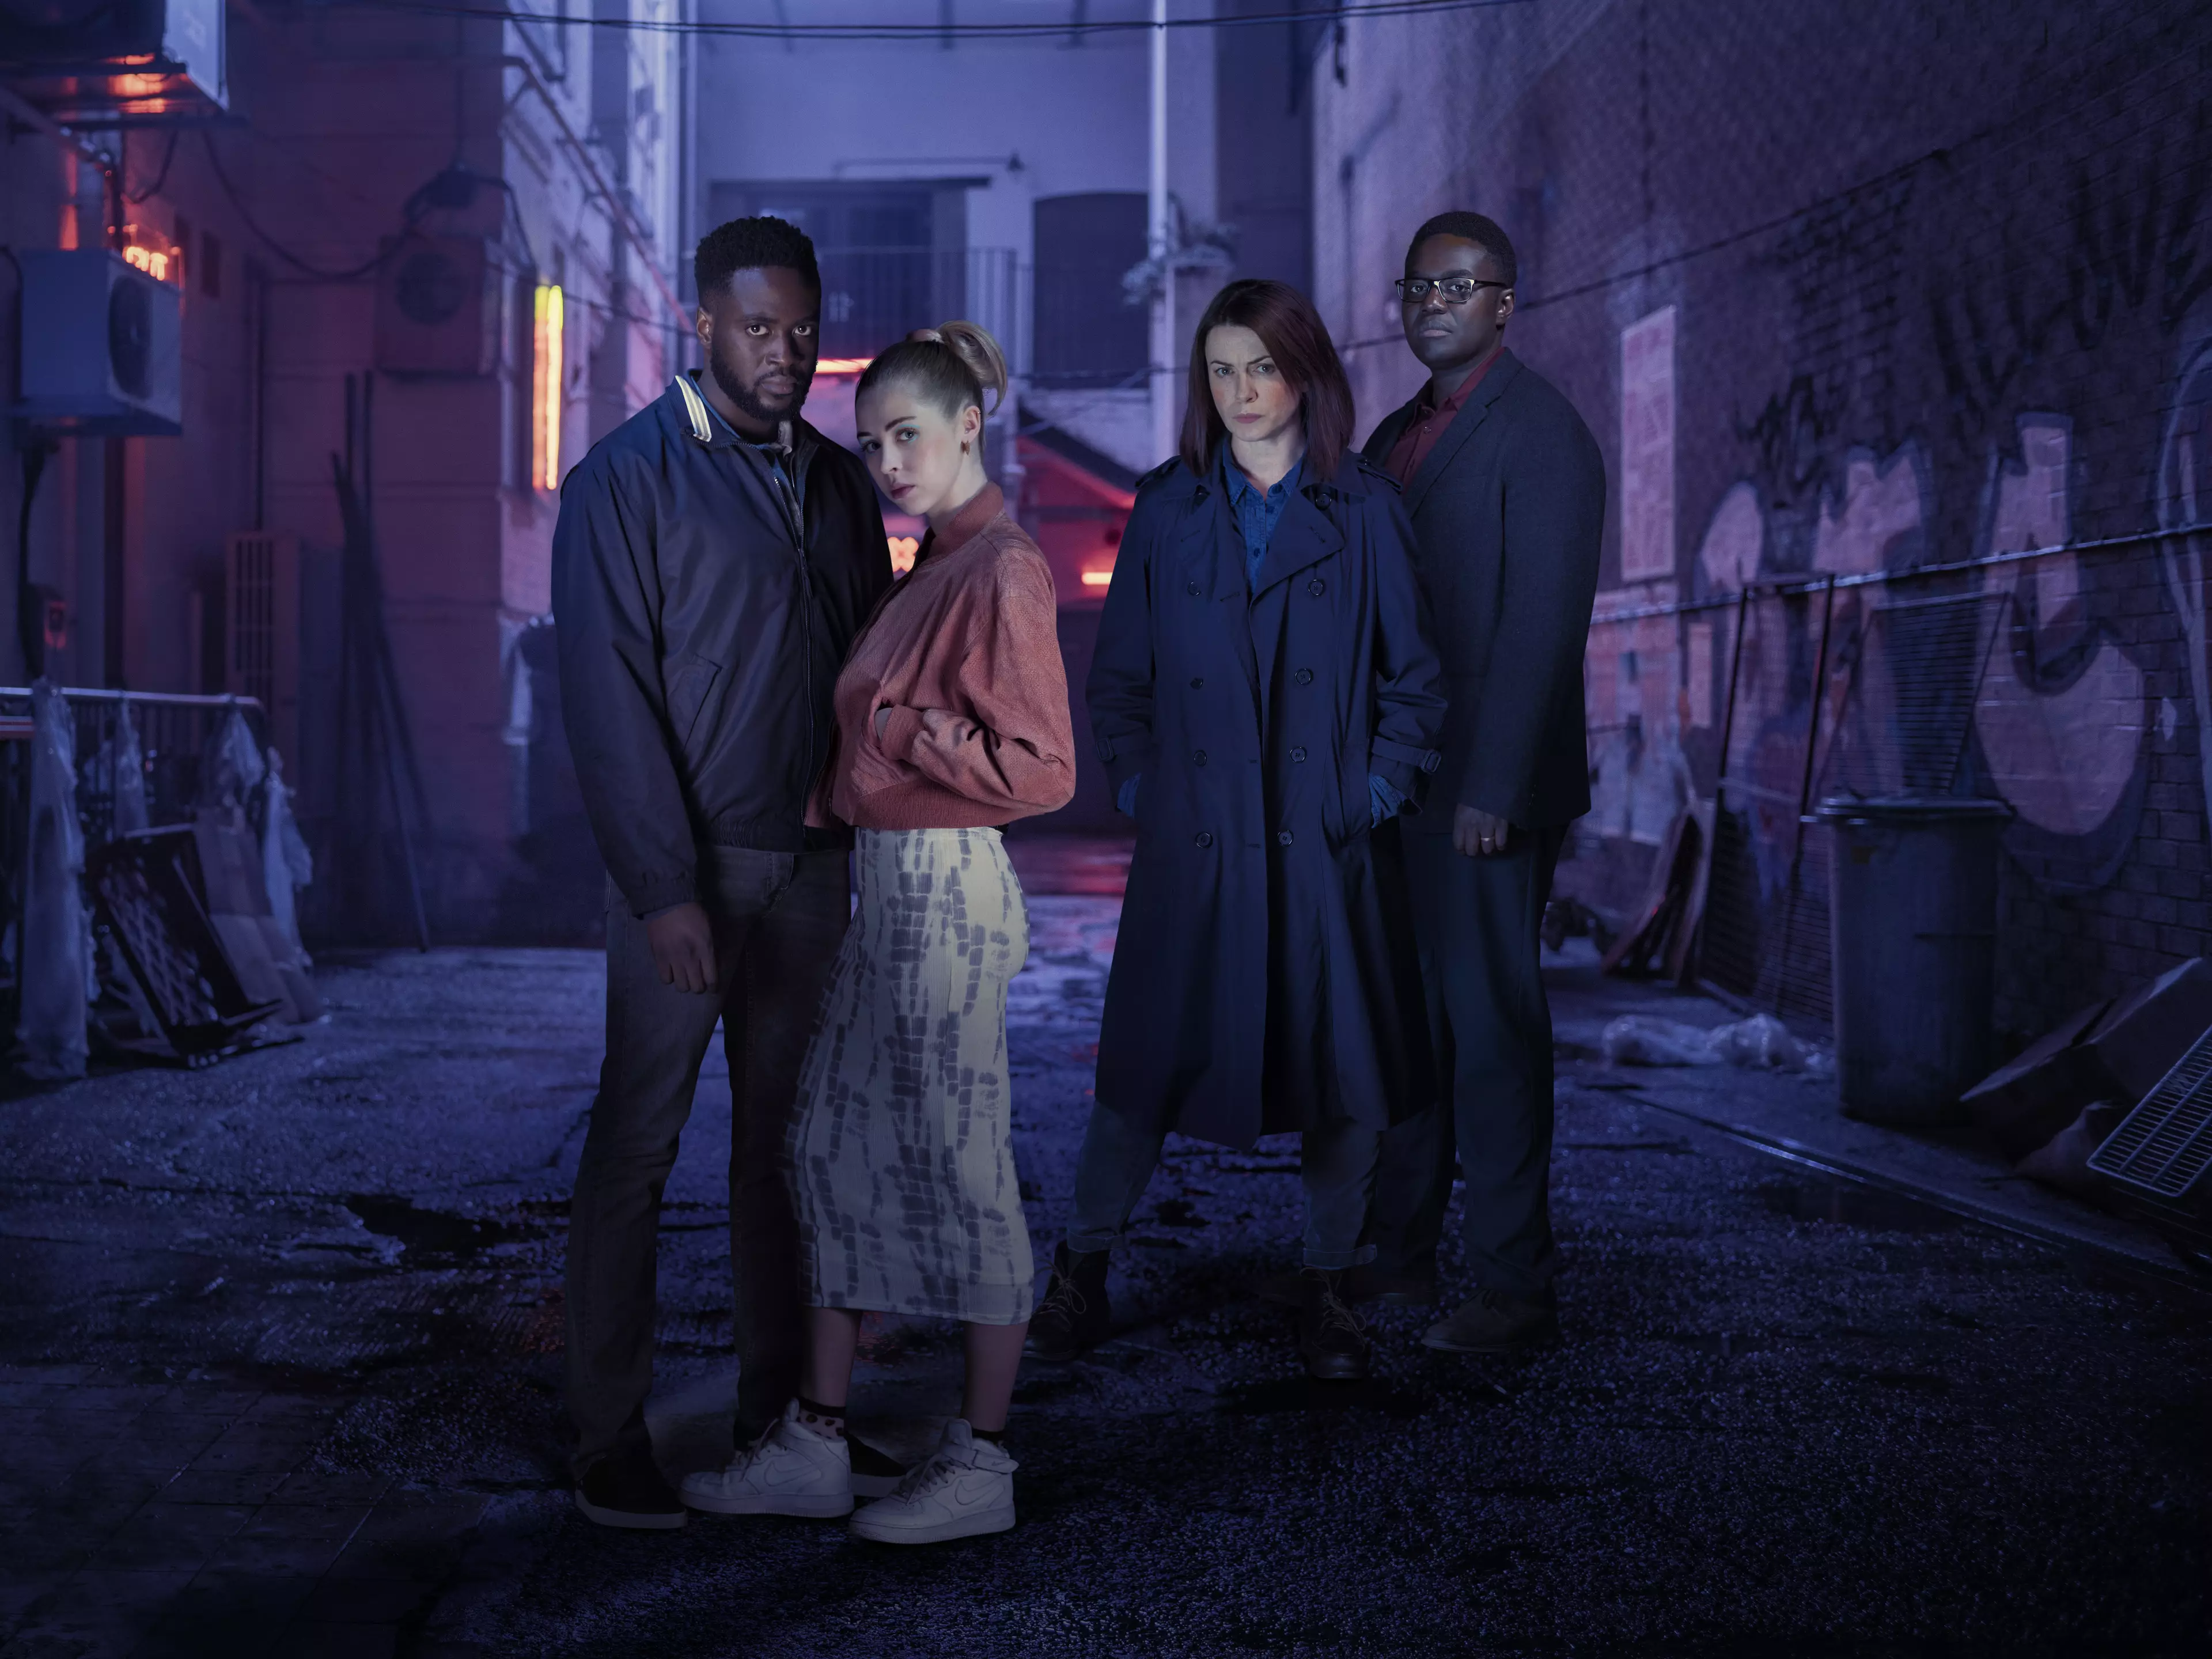 Alibi has just given crime drama fans the first look at their new six-part series 'We Hunt Together' (